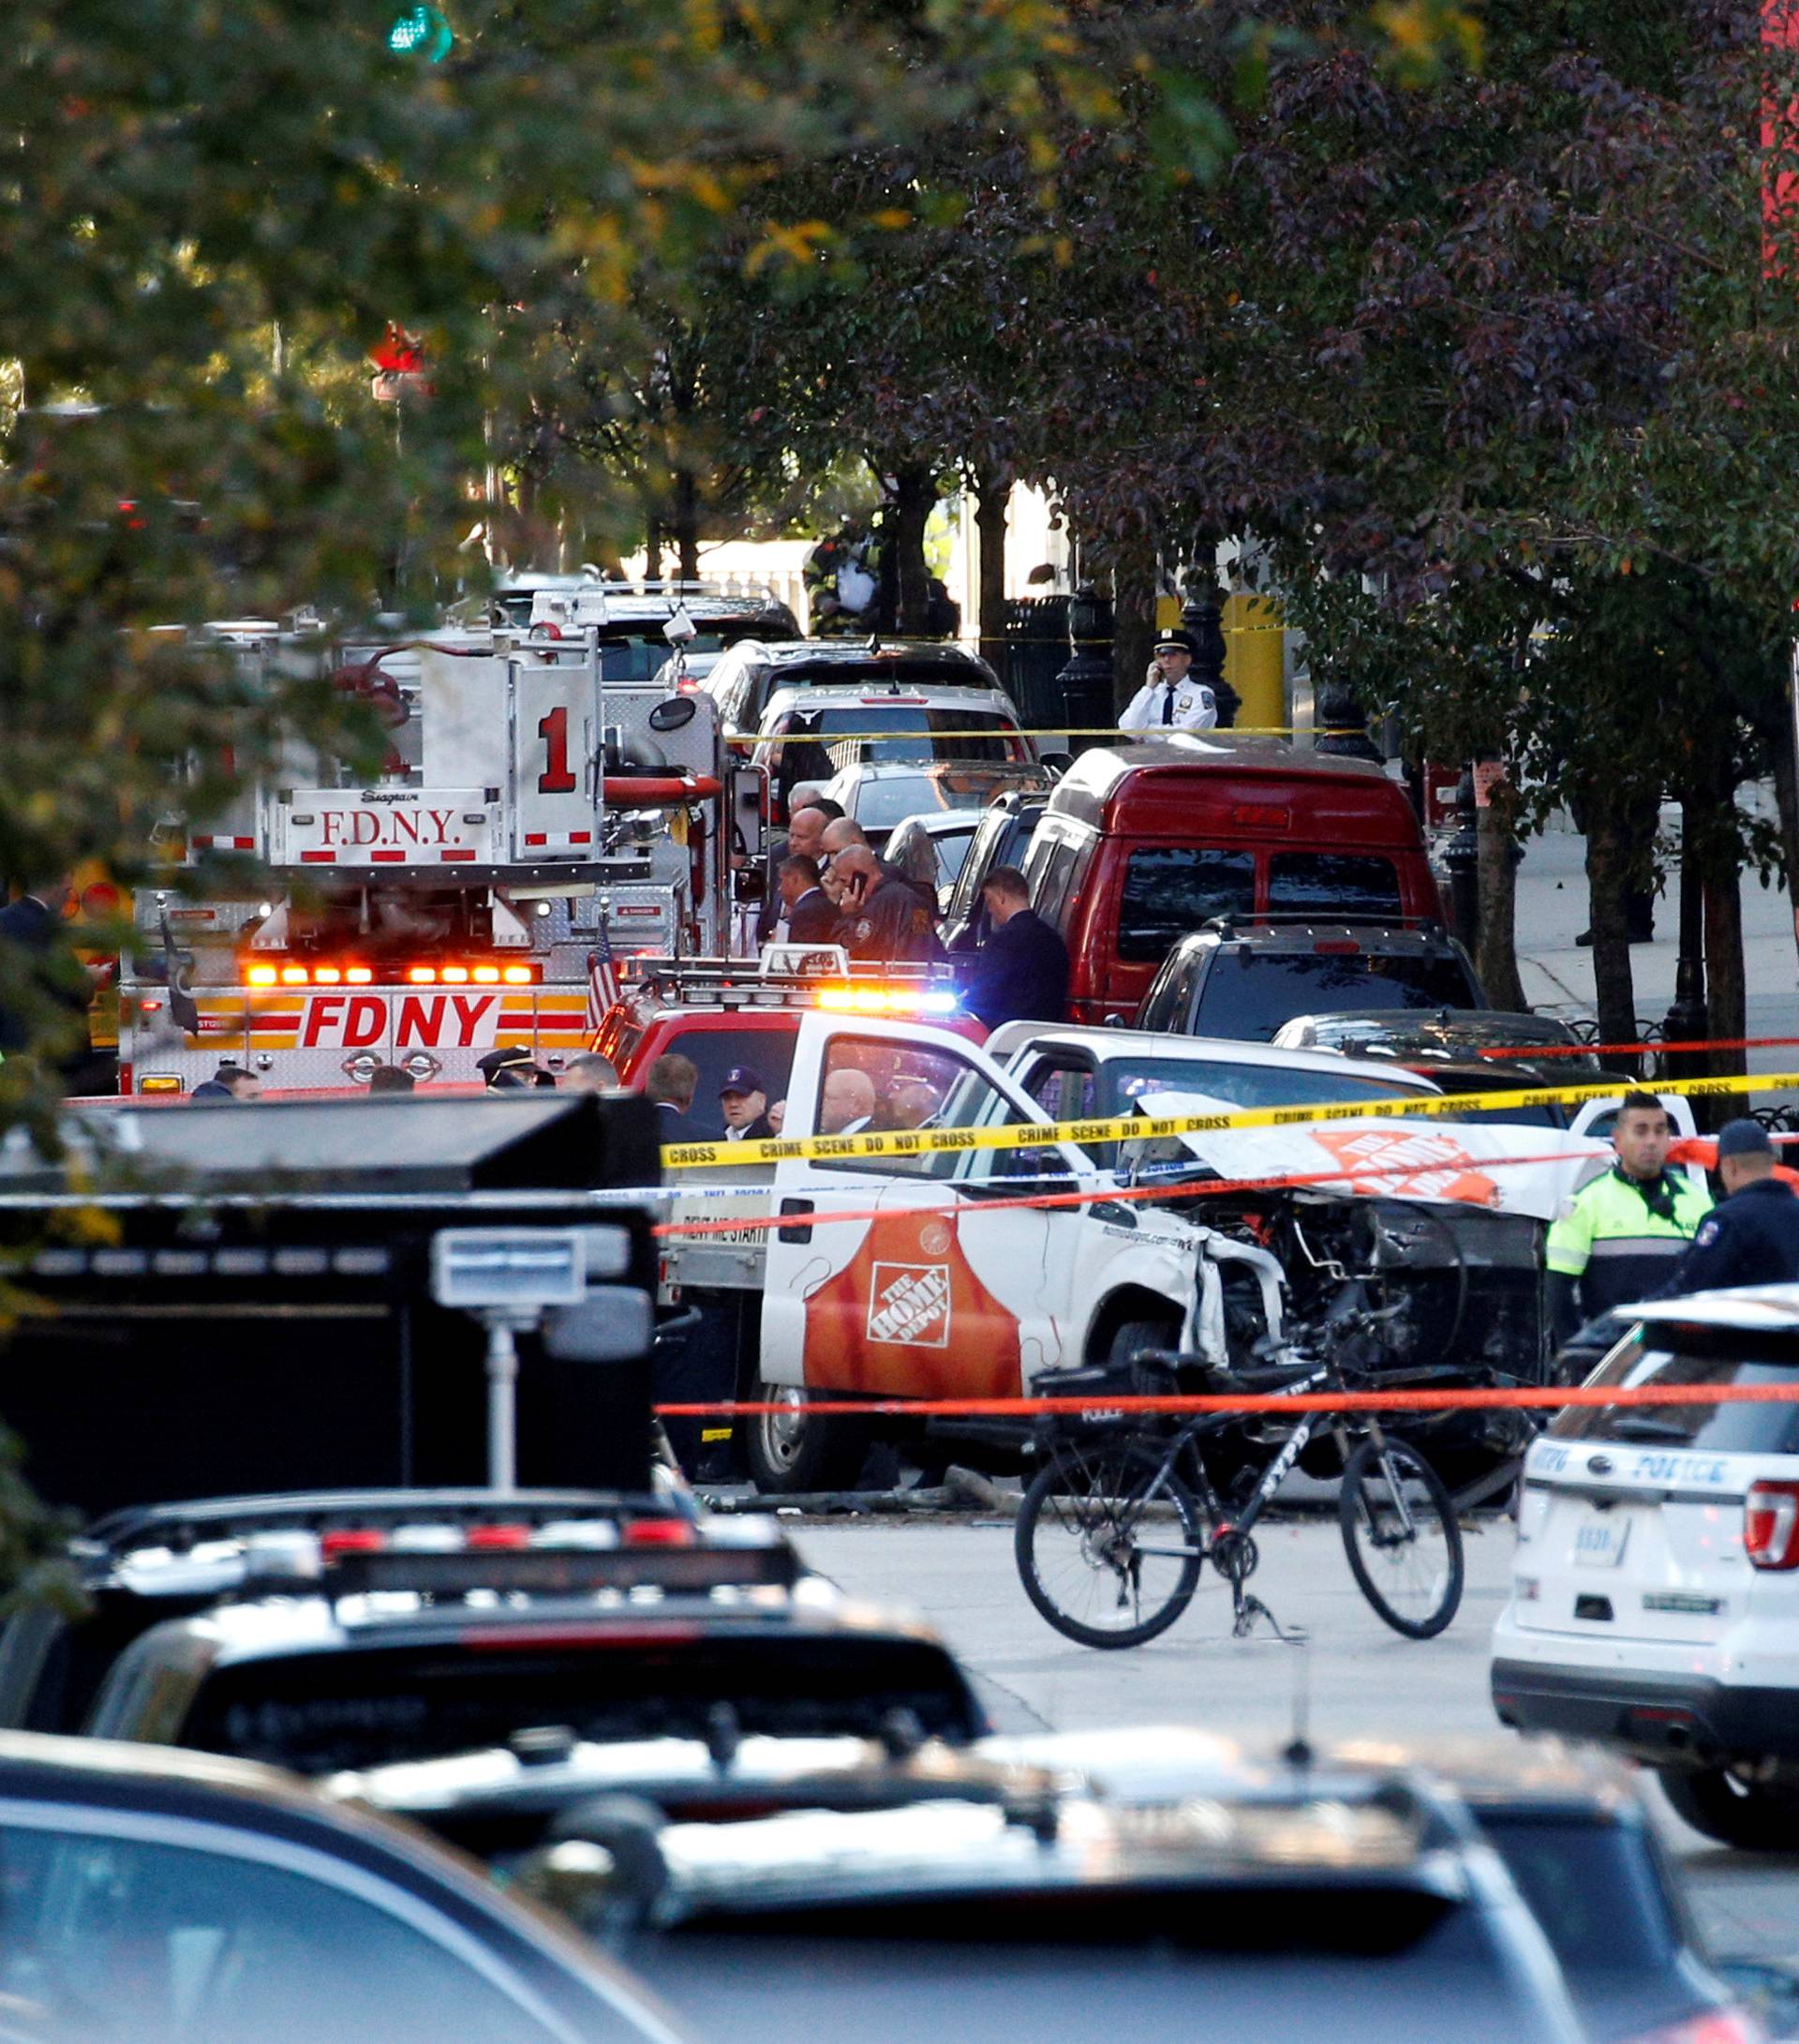 A Home Depot truck which struck down multiple people on a bike path, killing several and injuring numerous others, is seen as New York city first responders are at the crime scene in lower Manhattan in New York